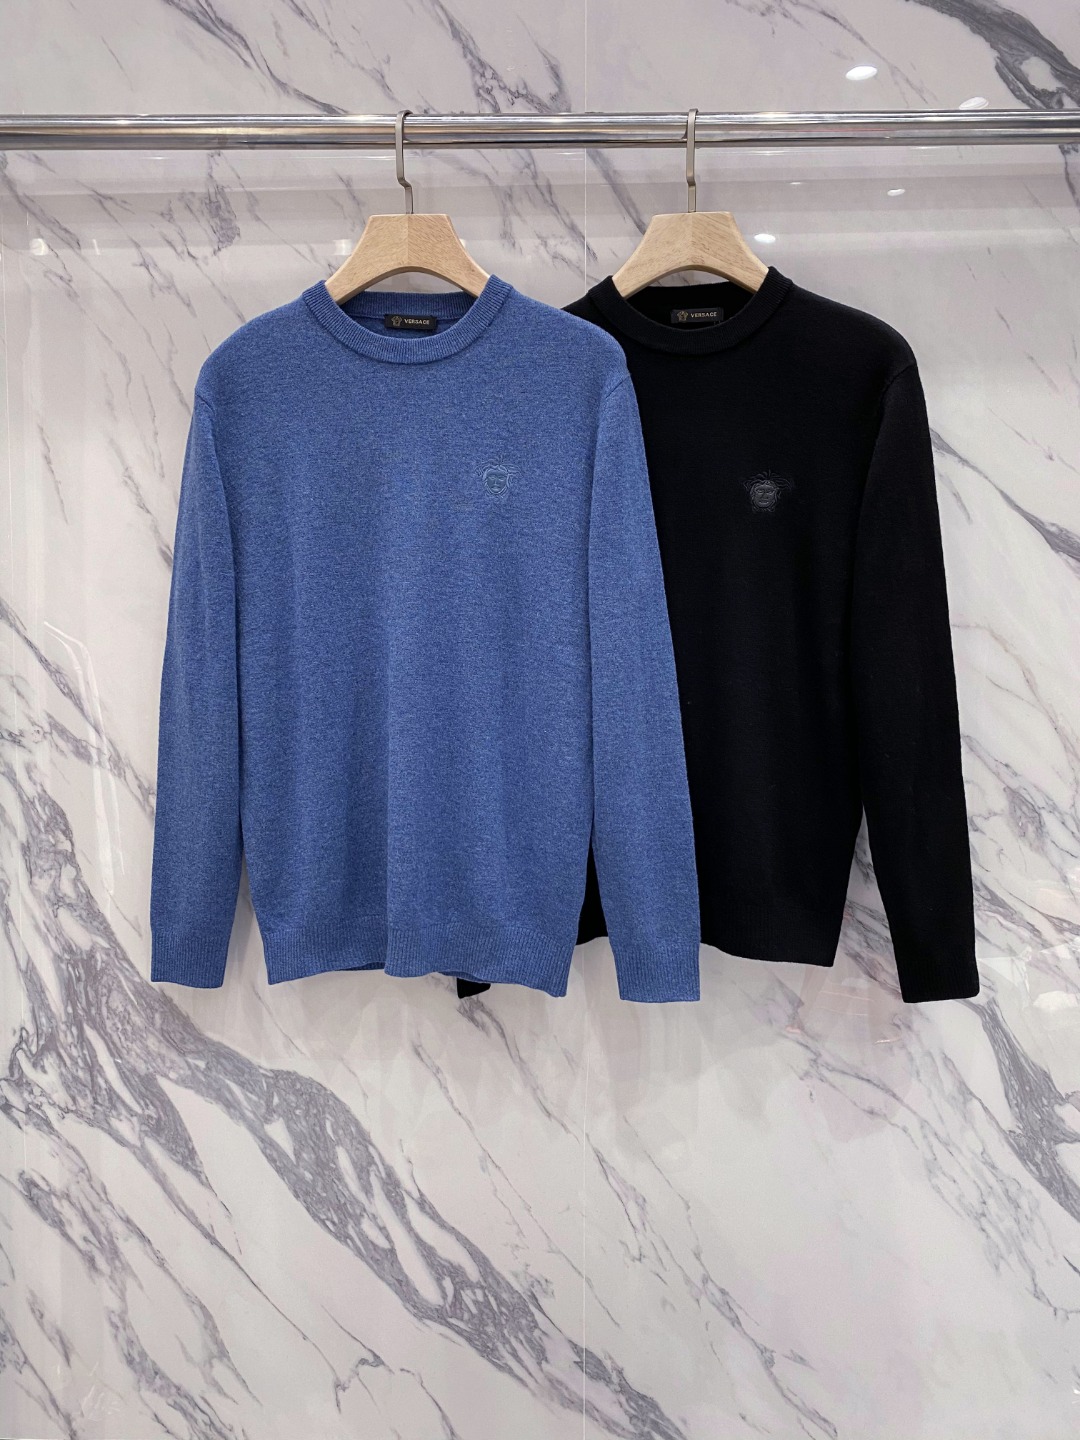 Versace Clothing Sweatshirts Cashmere Spandex Wool Fall/Winter Collection